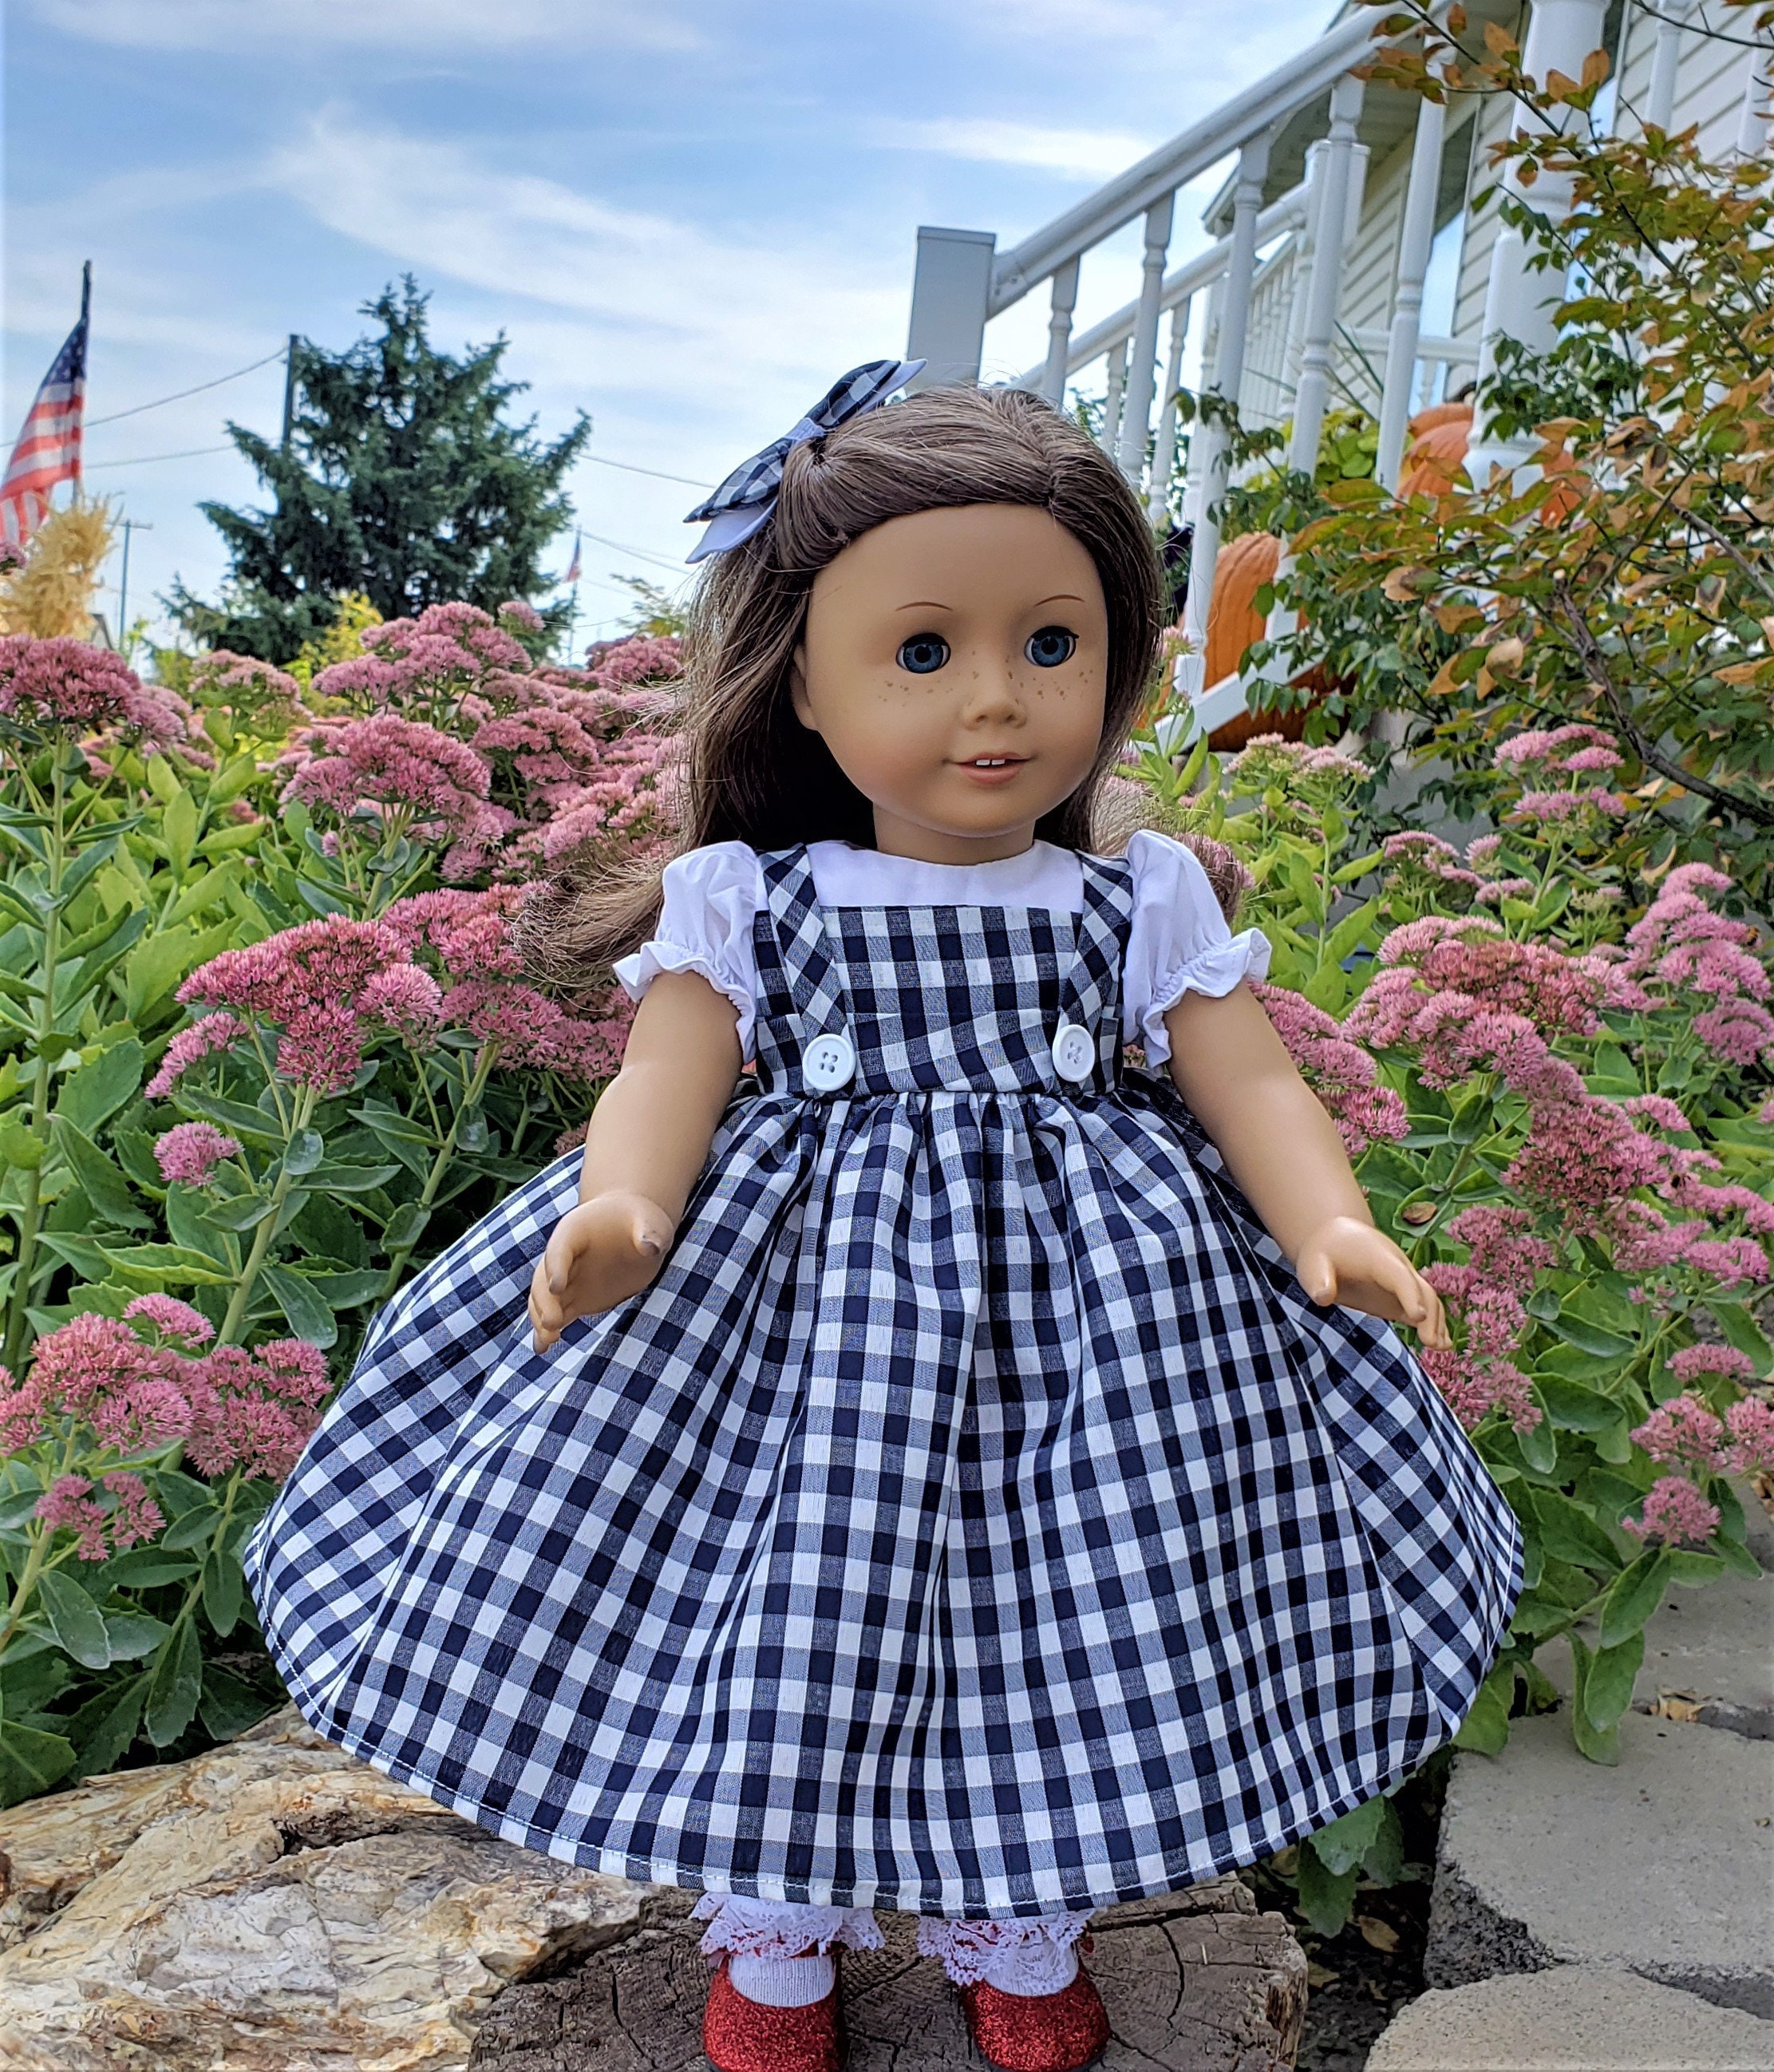 Dorothy is a handmade dress for an 18 inch doll such as | Etsy